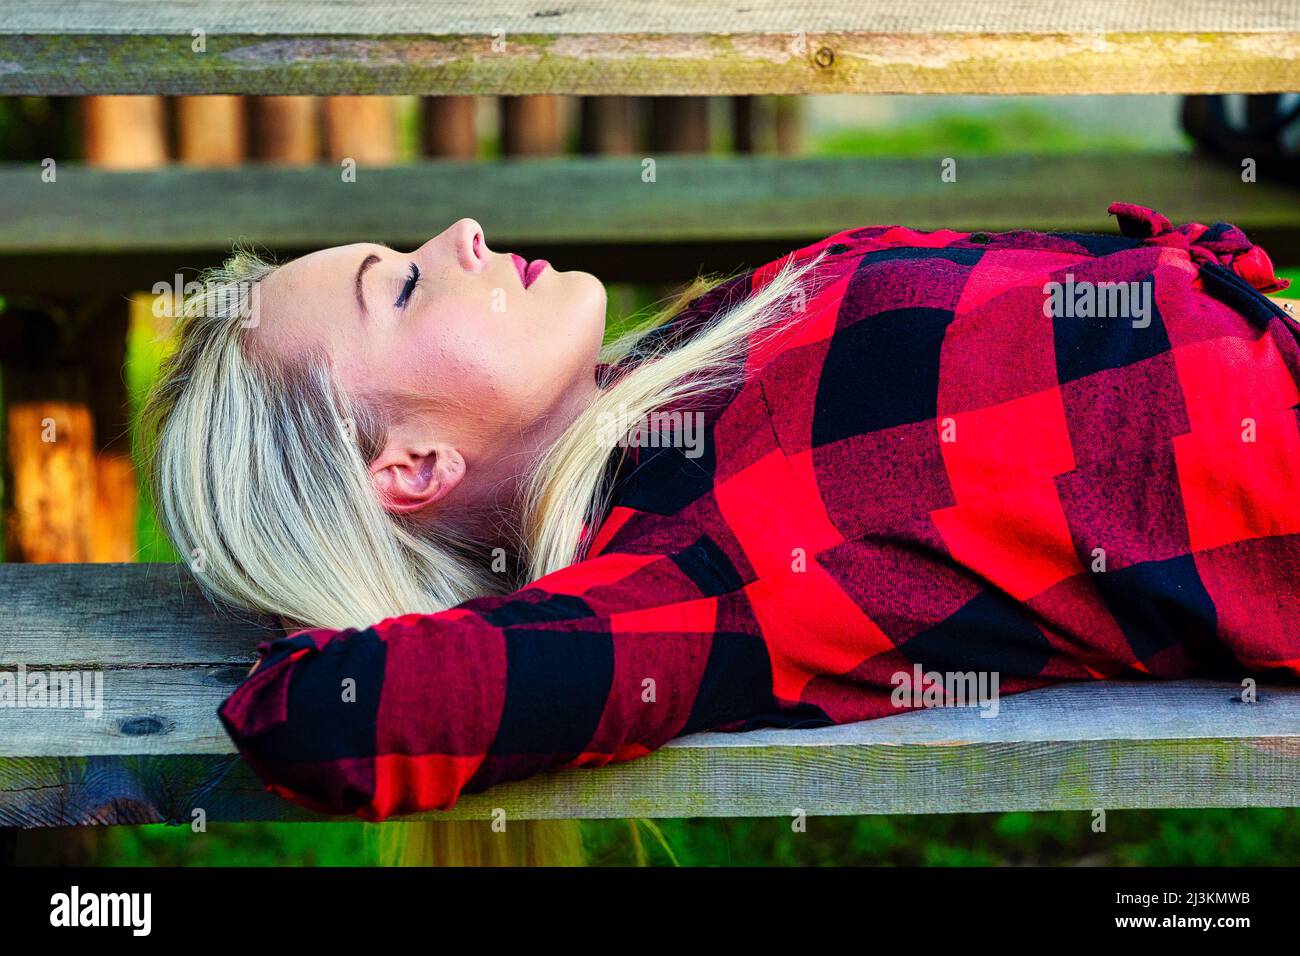 Serene young woman enjoying a sleep or nap on a park bench lying back with hands behind her head in a colorful red shirt in a close up side view Stock Photo